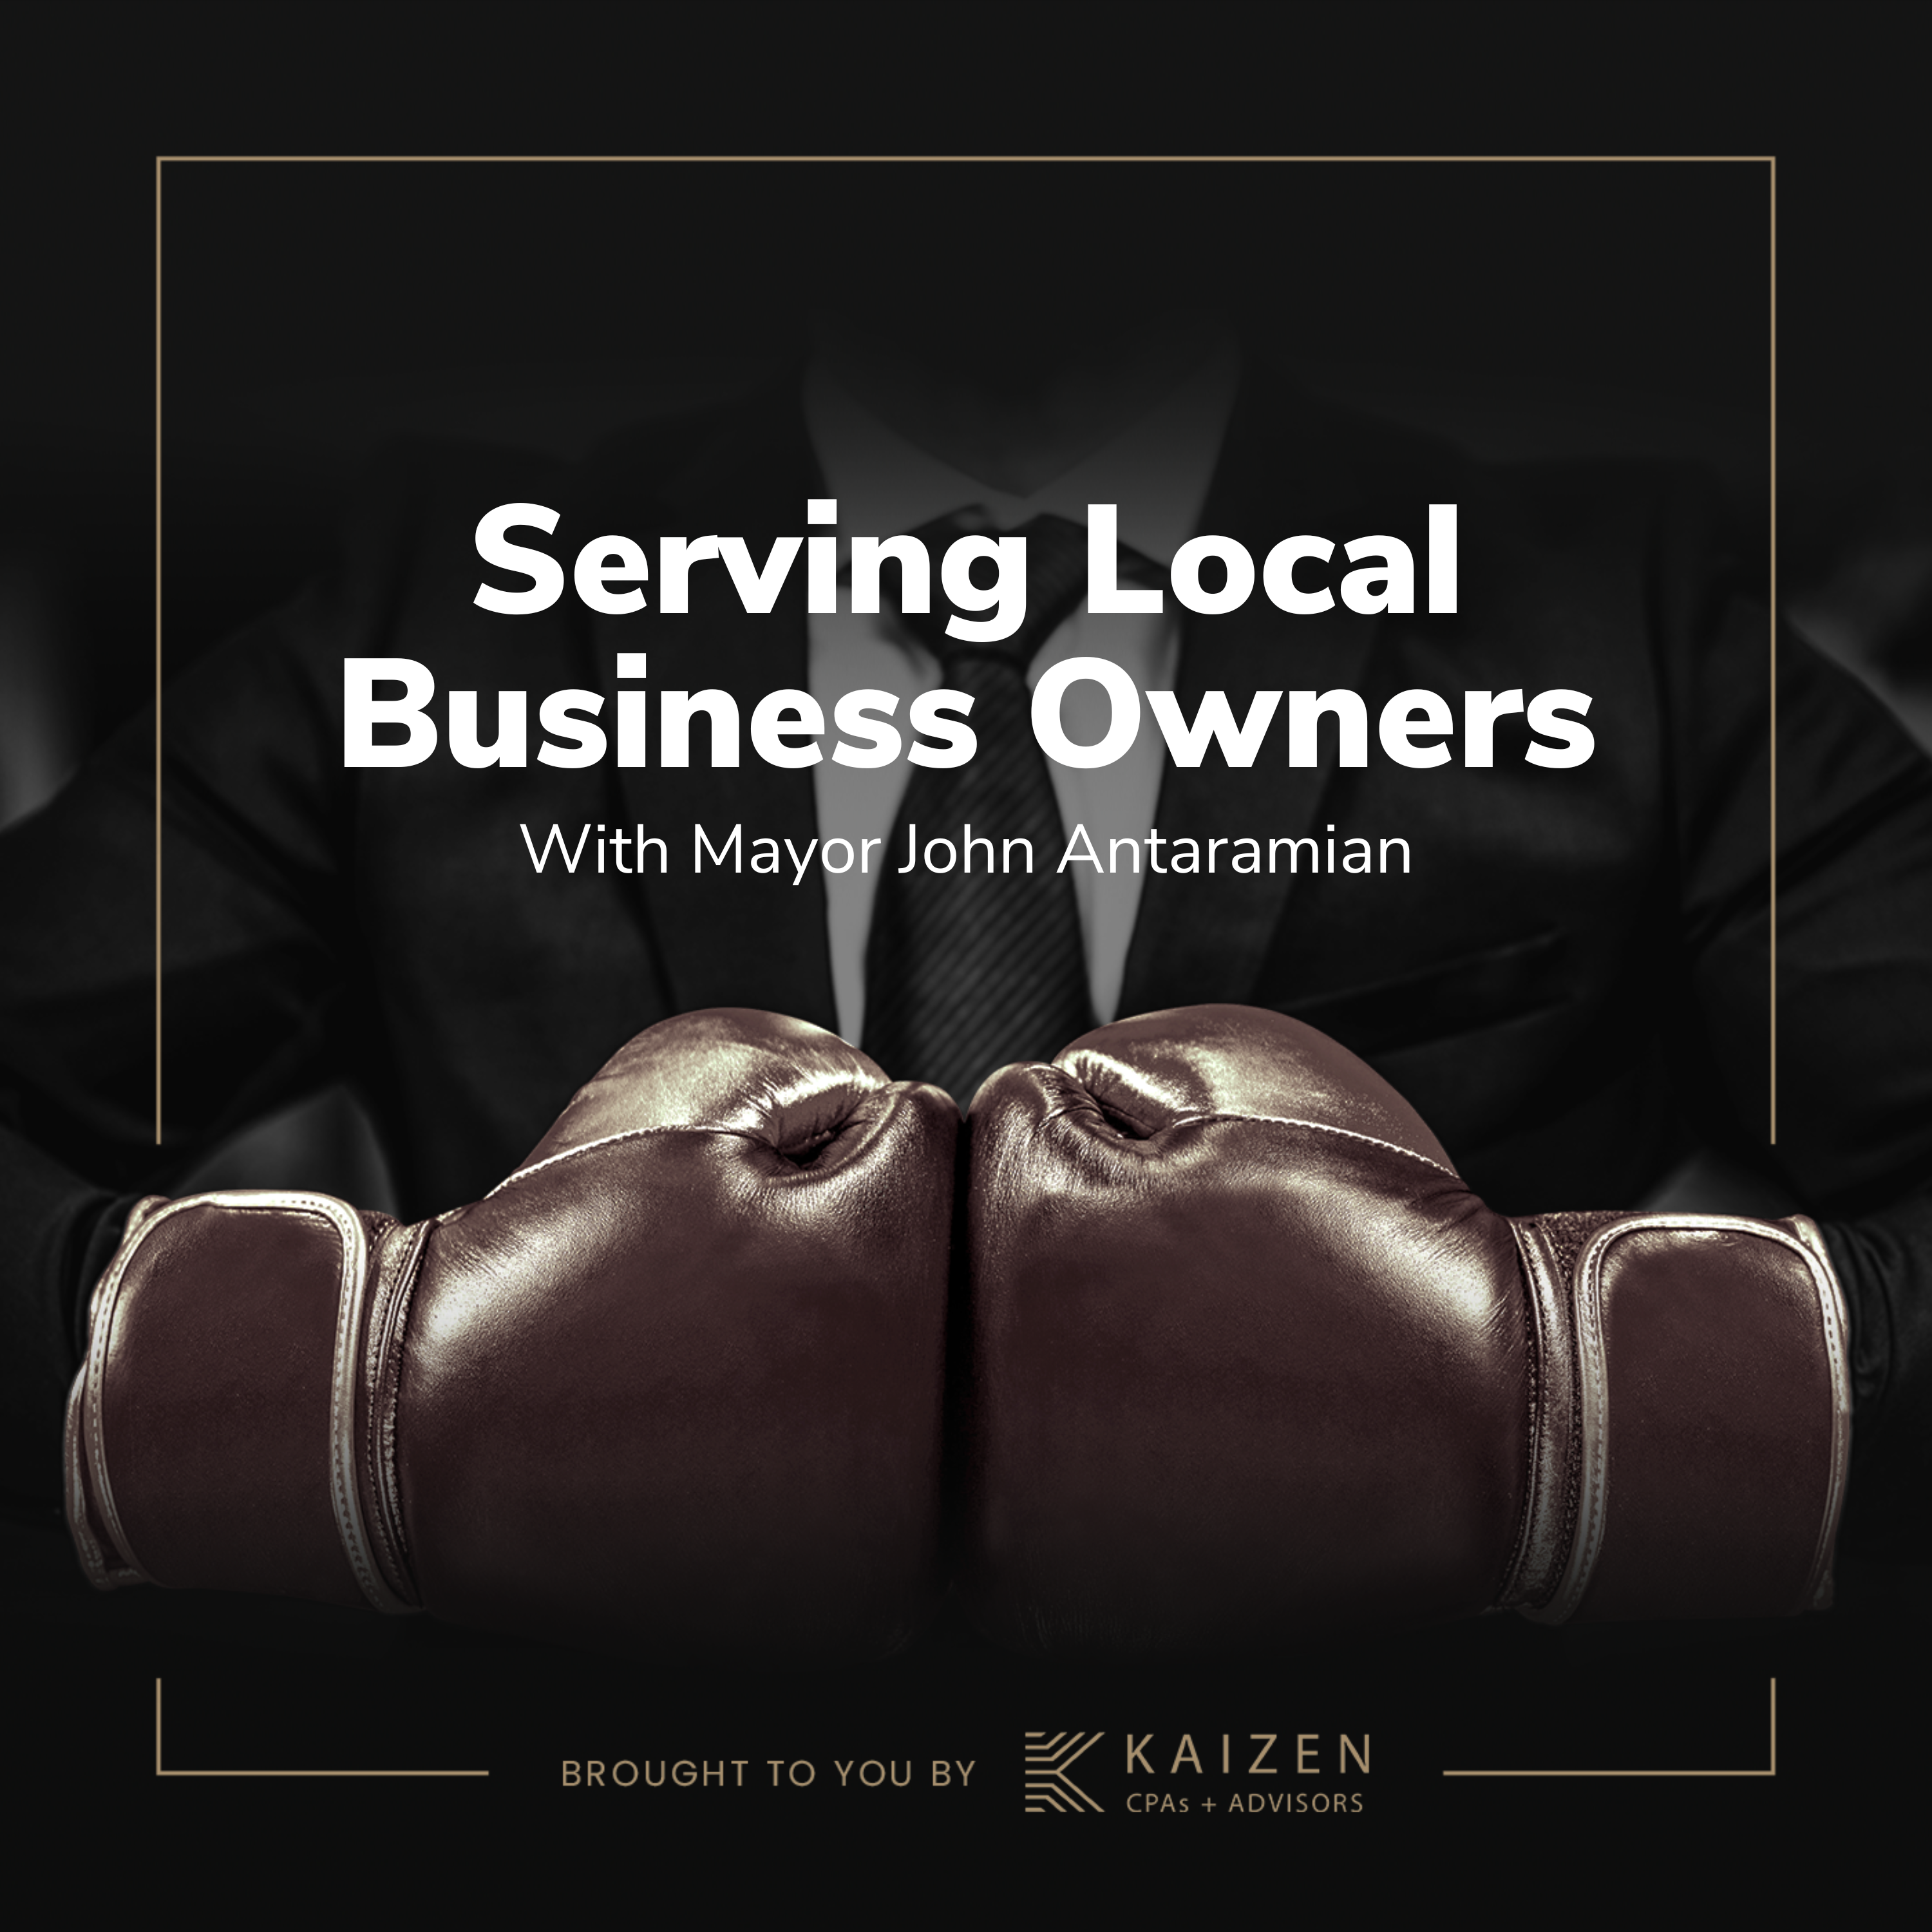 Serving Local Business Owners